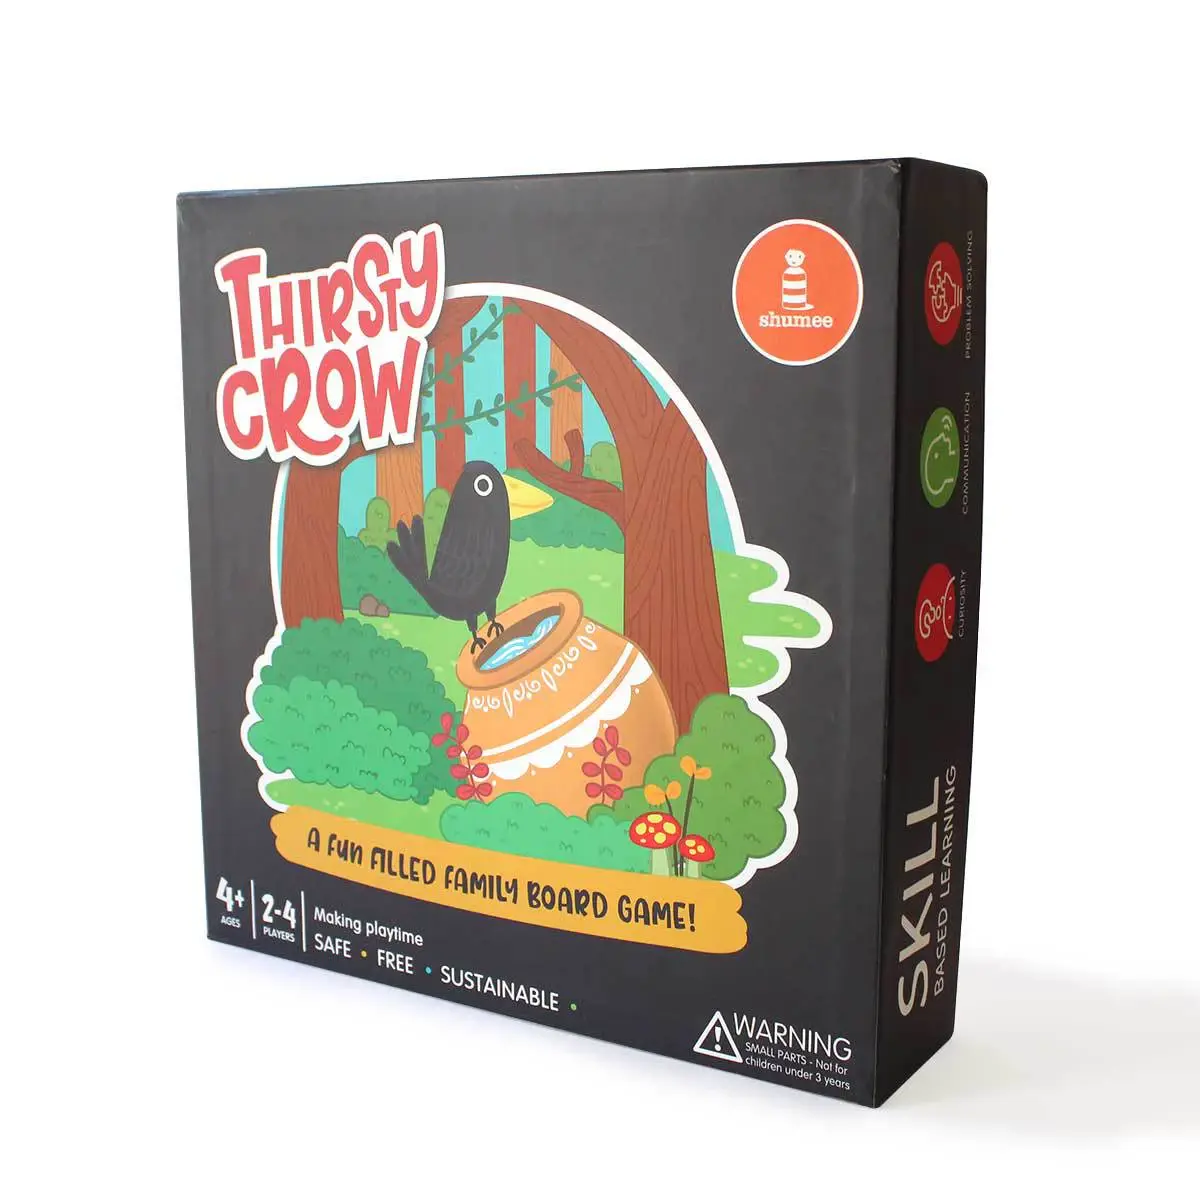 Shumee Thirsty Crow Board Game Multicolour 48M+